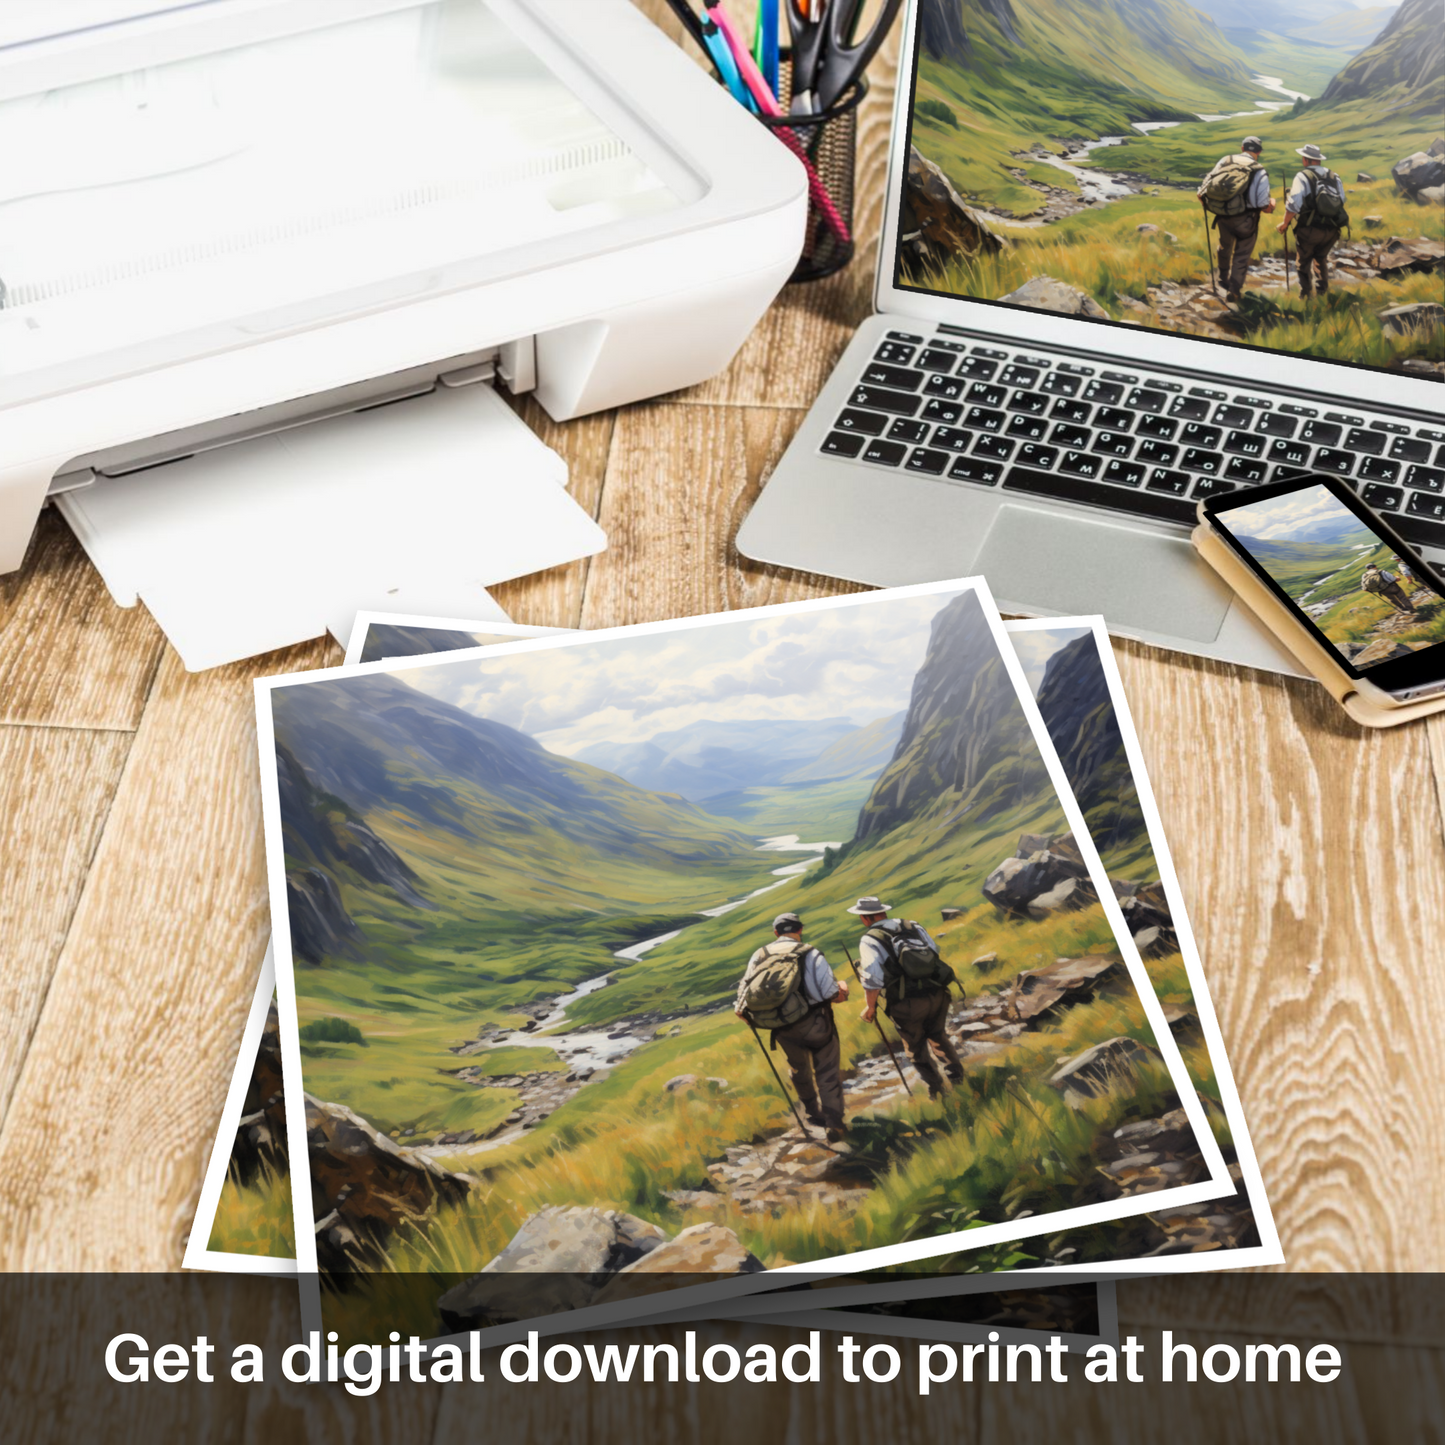 Downloadable and printable picture of Hikers in Glencoe